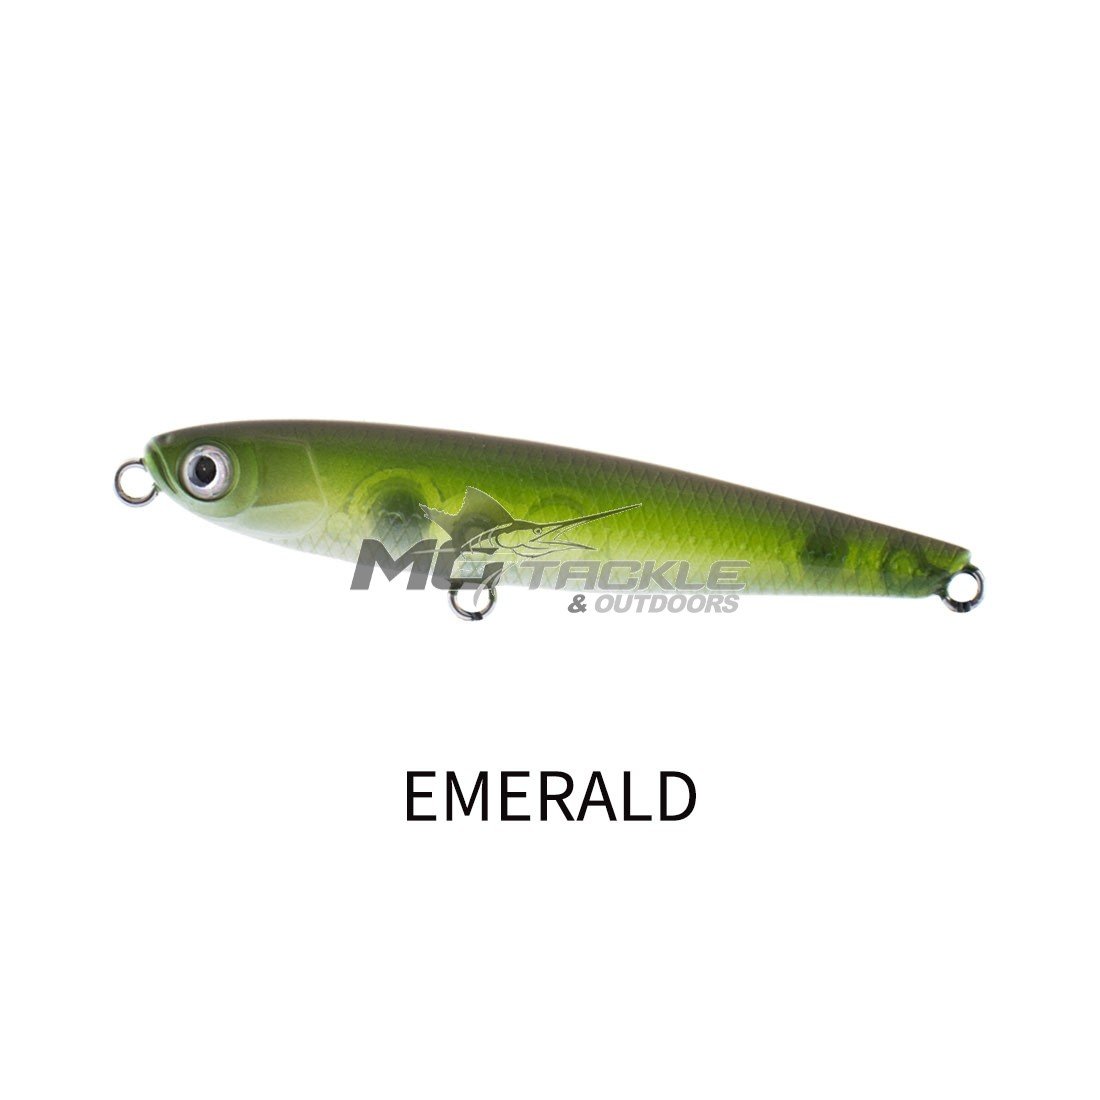 Feng Lin on LinkedIn: #fishing lure #pencil lure propeller lure